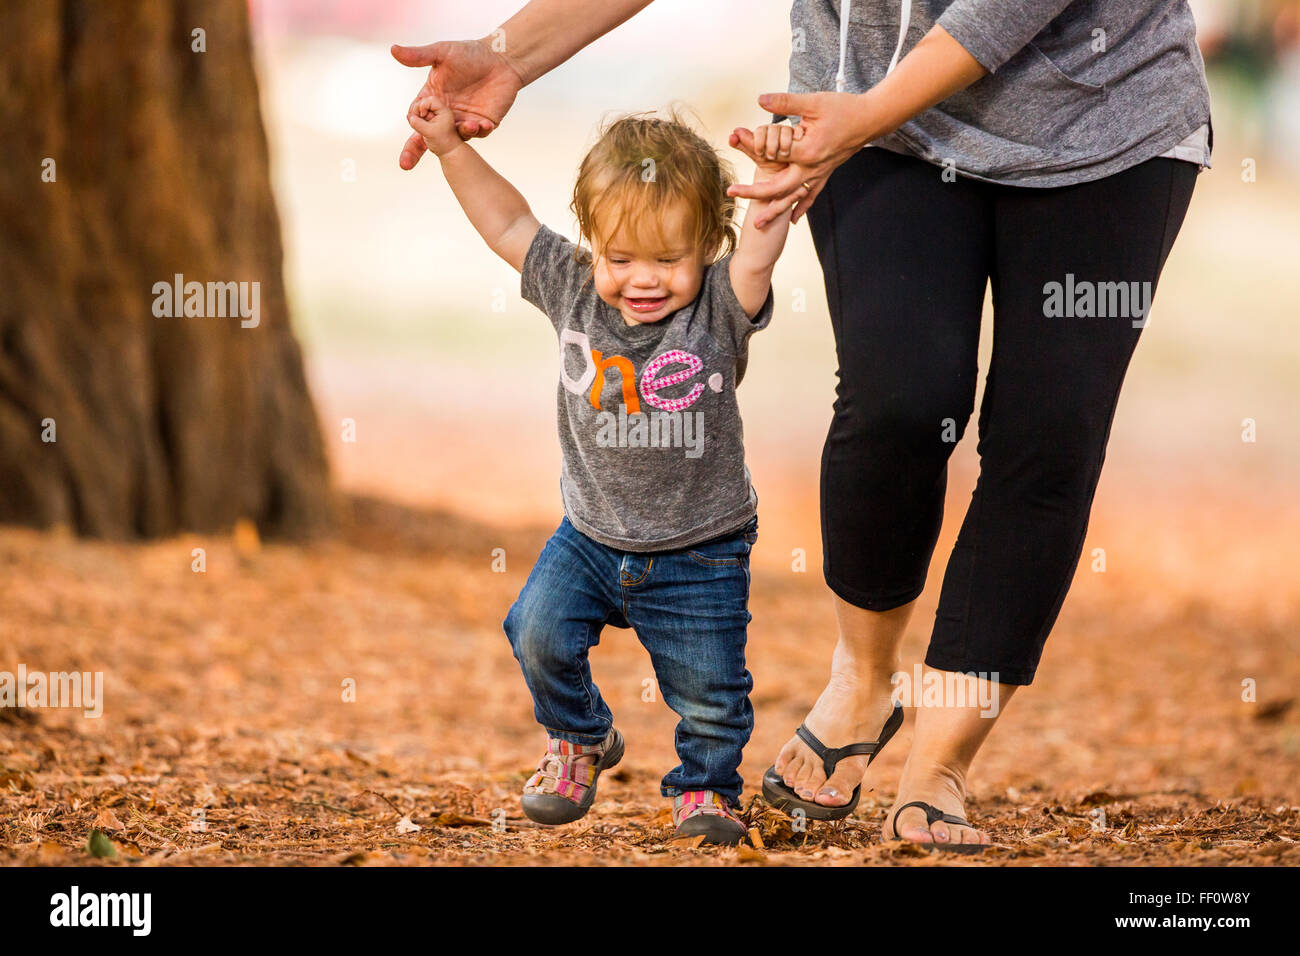 Caucasian mother and daughter walking outdoors Banque D'Images